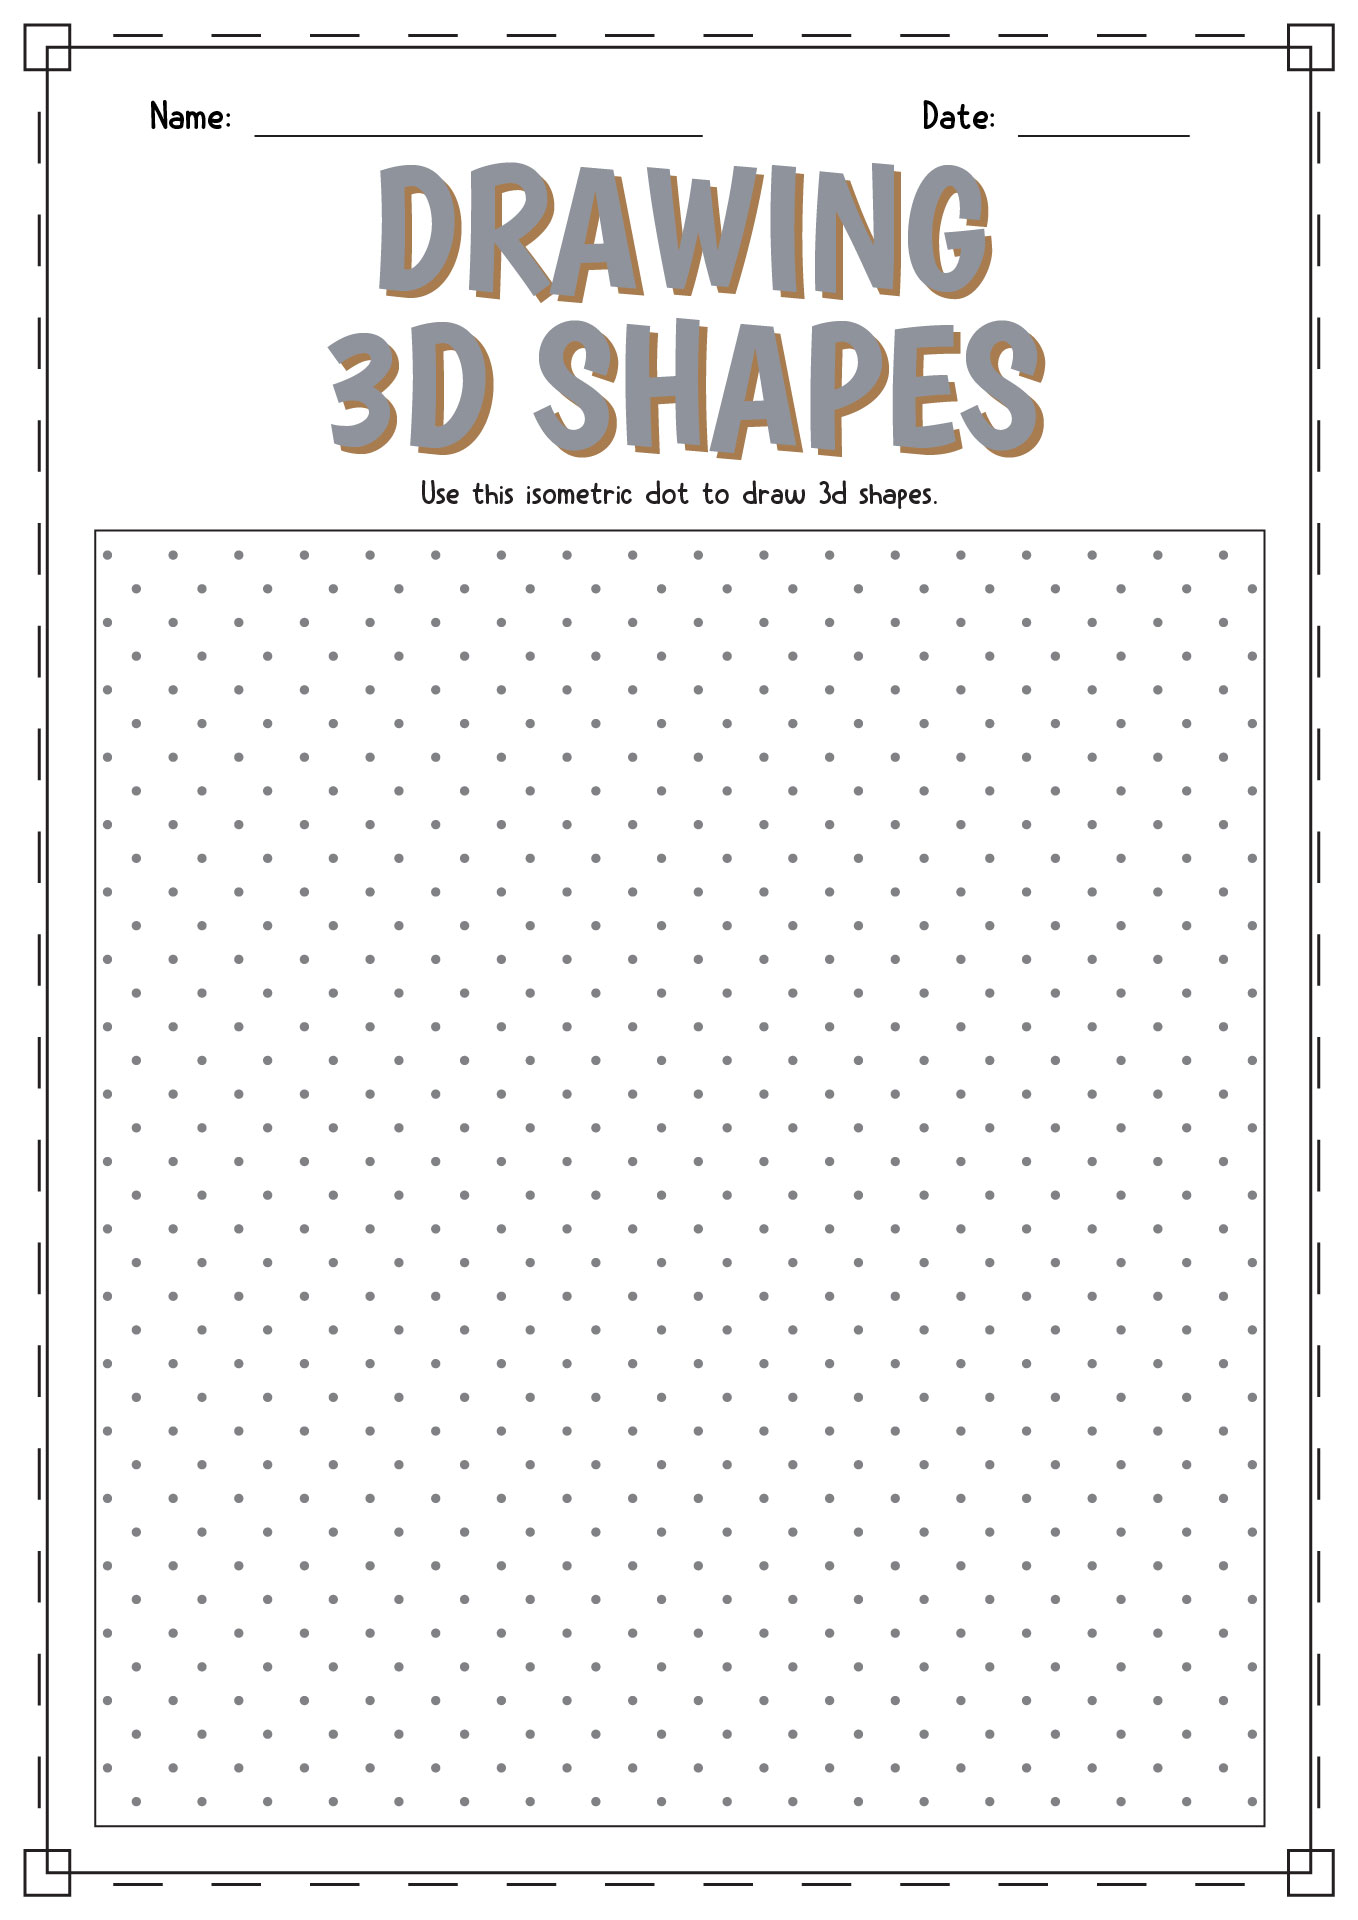 Drawing 3D Shapes On Isometric Dot Paper